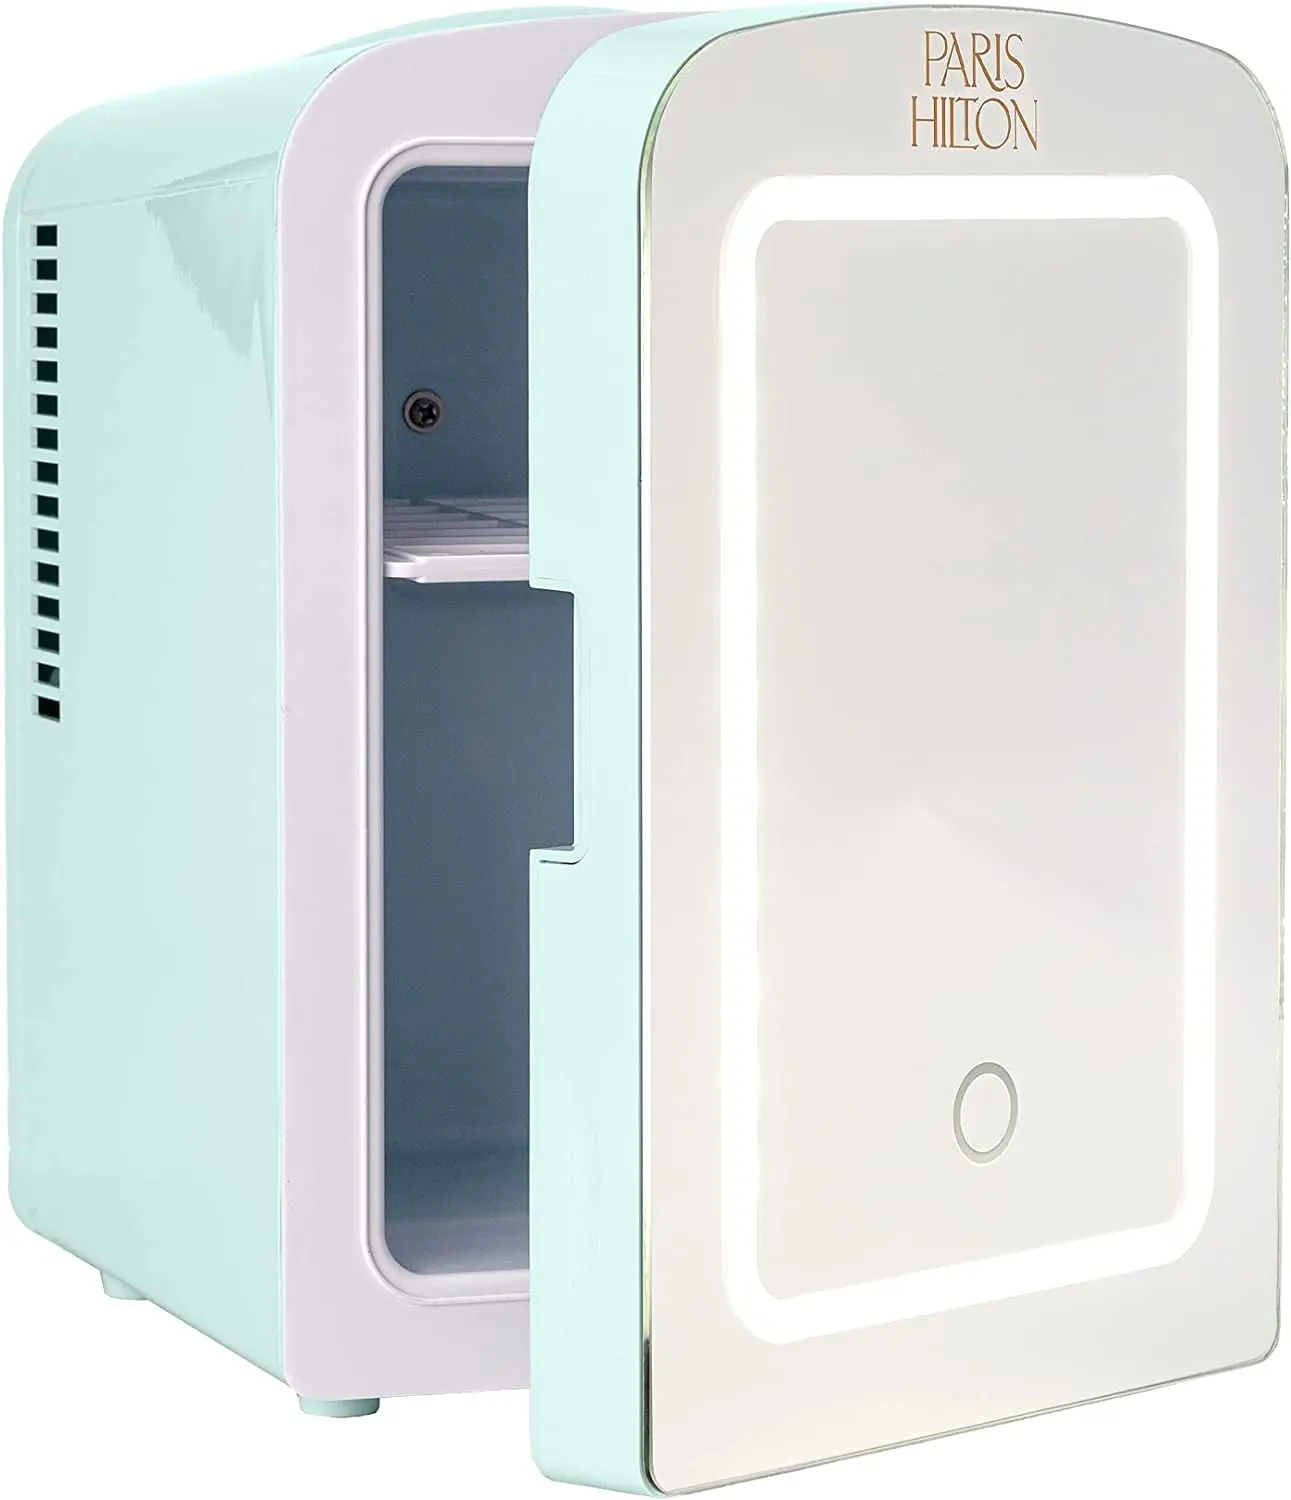 Free Shipping Mini Refrigerator and Personal Beauty Fridge Mirrored Door with Dimmable LED Light Thermoelectric Cooling and Warm